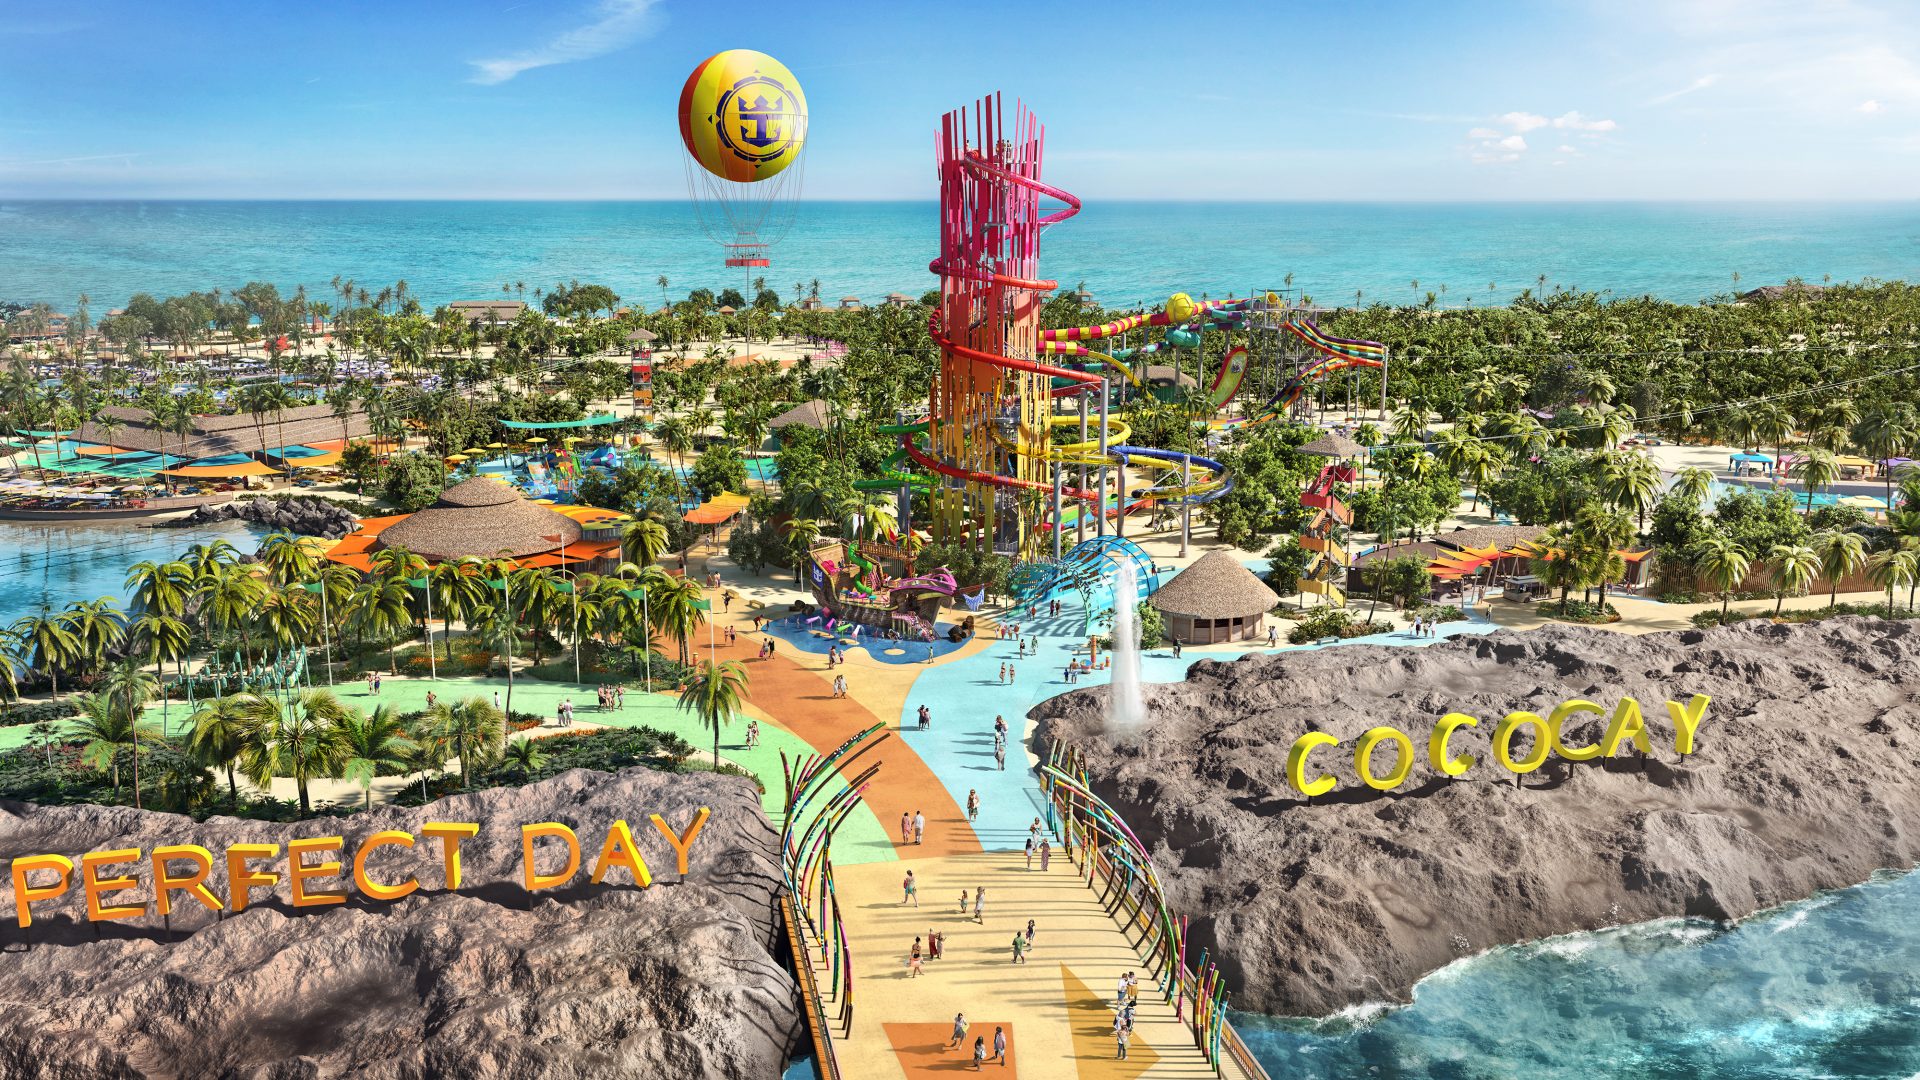 Royal Caribbean’s Perfect Day Island Features Martin Aquatic Water Park and Pools